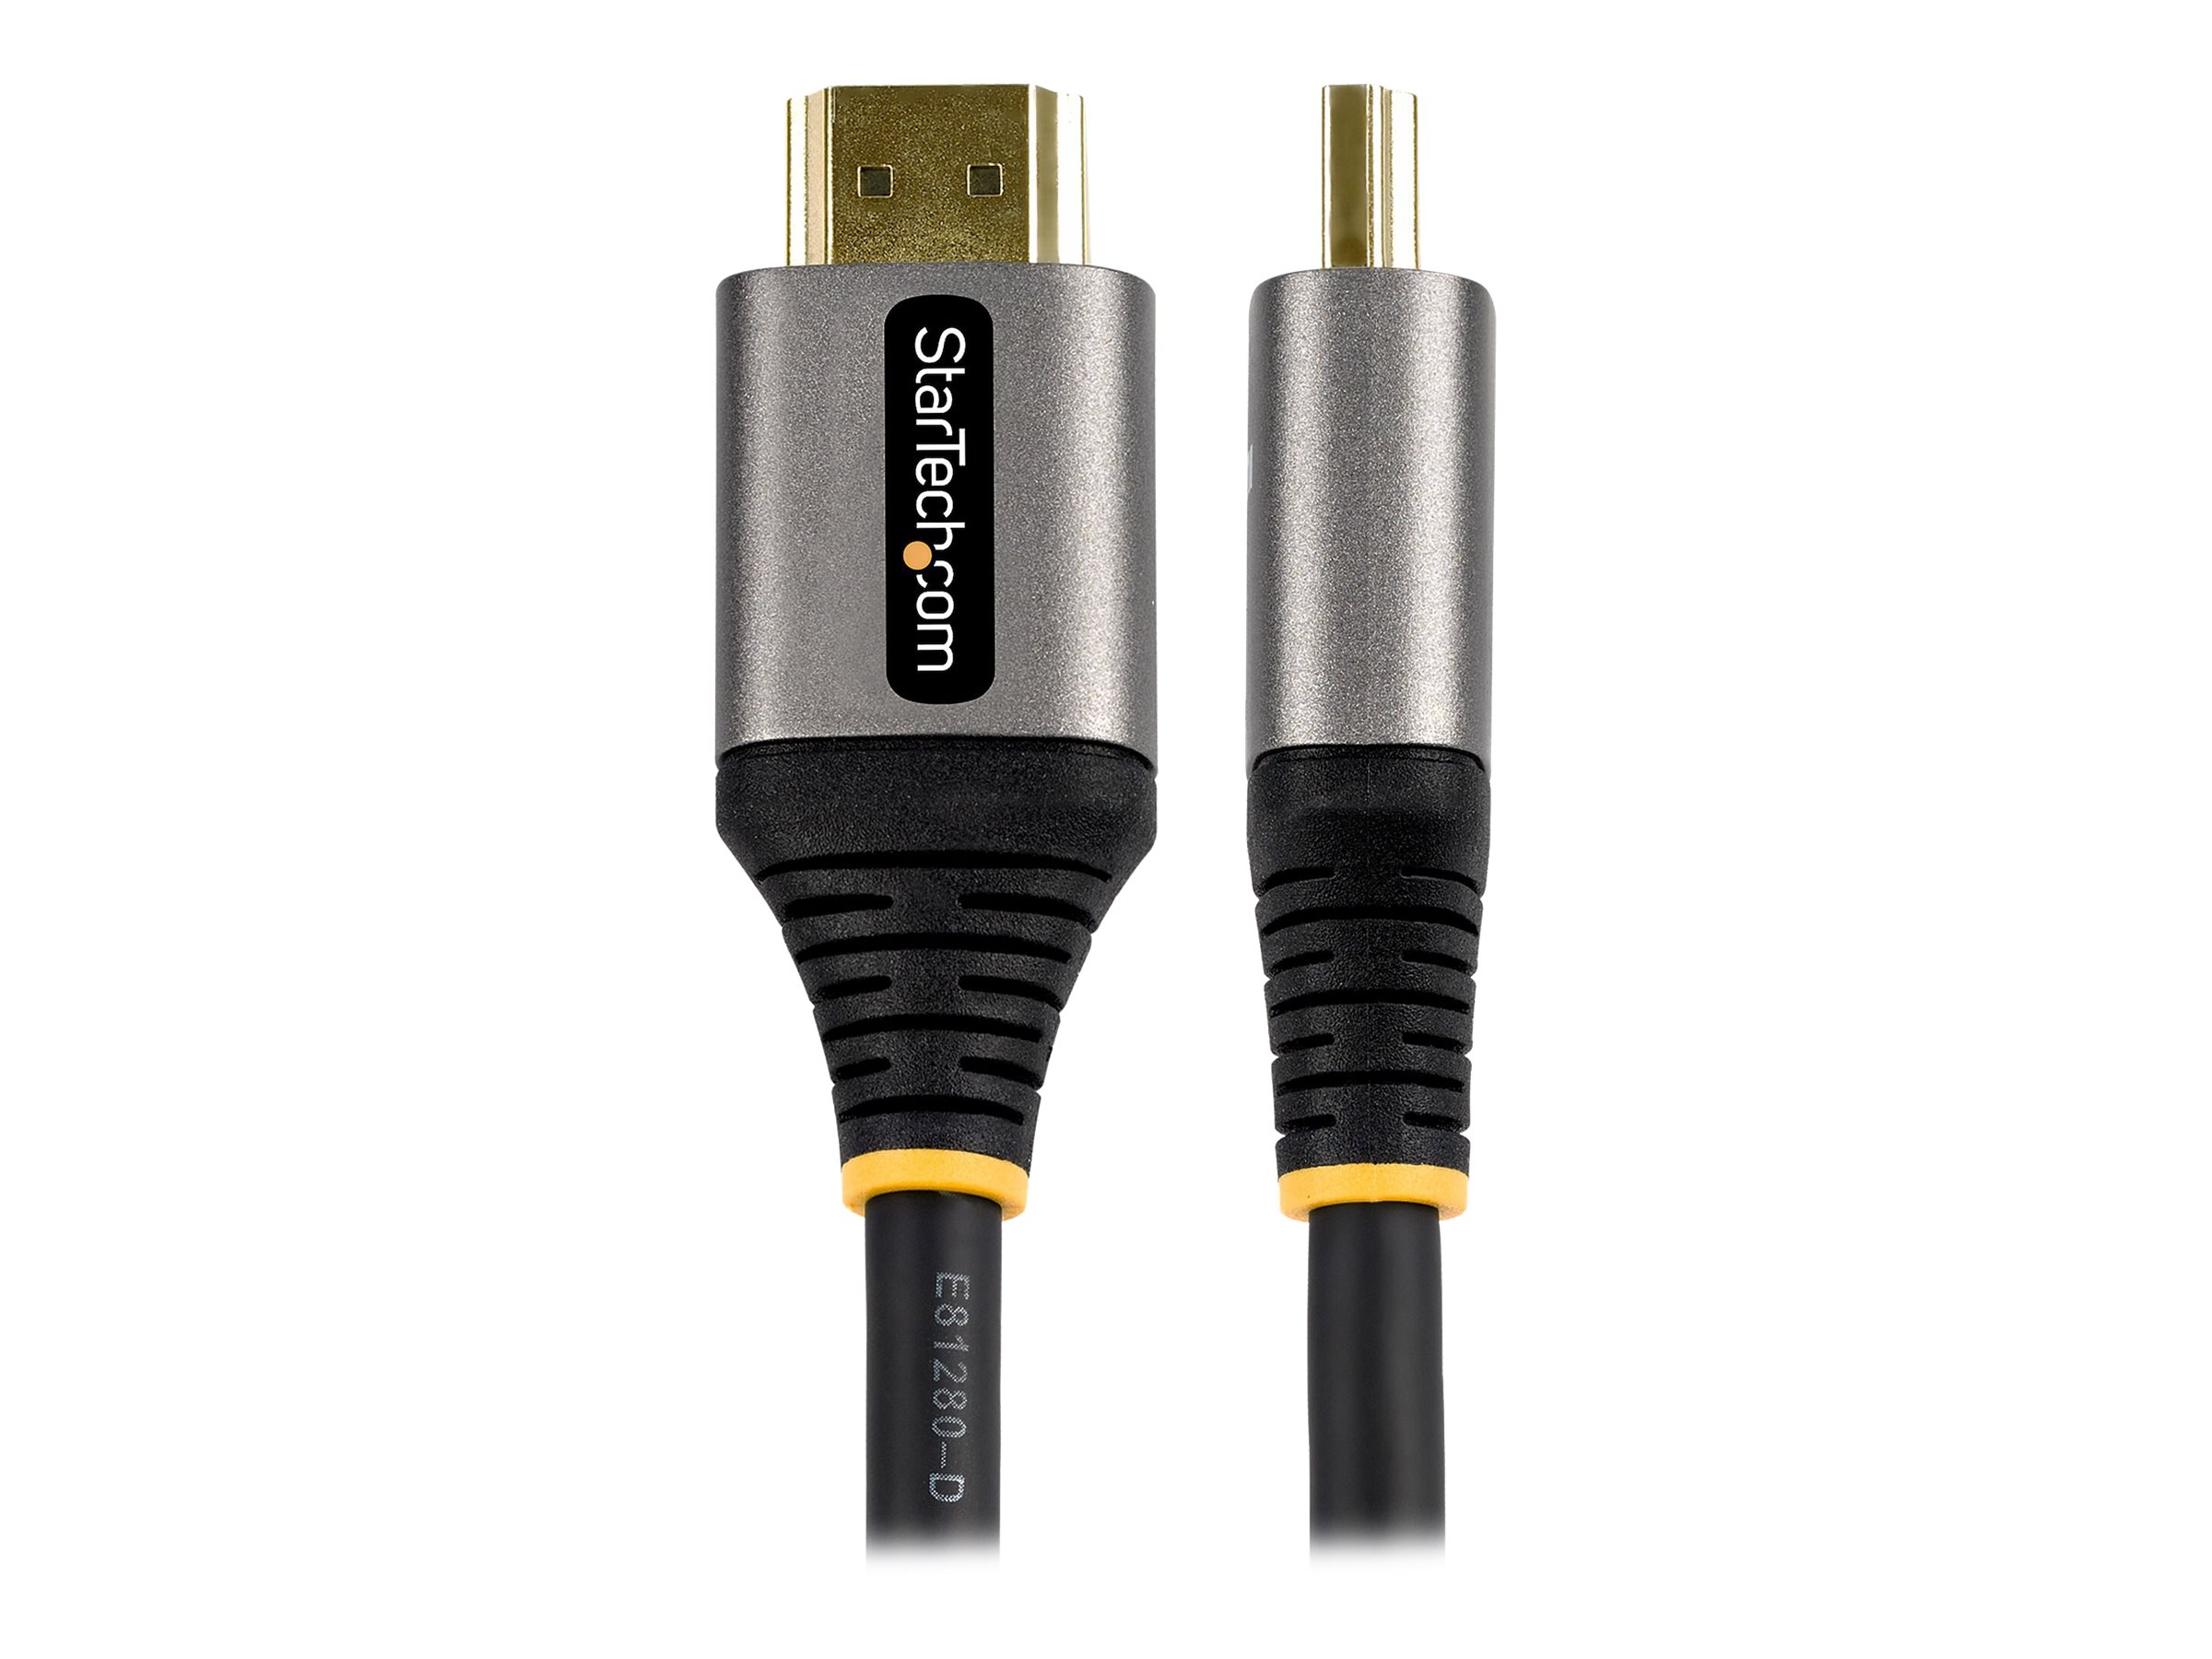 StarTech.com 12ft (4m) HDMI 2.1 Cable, Certified Ultra High Speed HDMI Cable 48Gbps, 8K 60Hz/4K 120Hz HDR10+ eARC, Ultra HD 8K HDMI Cable/Cord w/TPE Jacket, For UHD Monitor/TV/Display - Dolby Vision/Atmos, DTS-HD (HDMM21V4M) - HDMI-Kabel mit Ethernet - 4